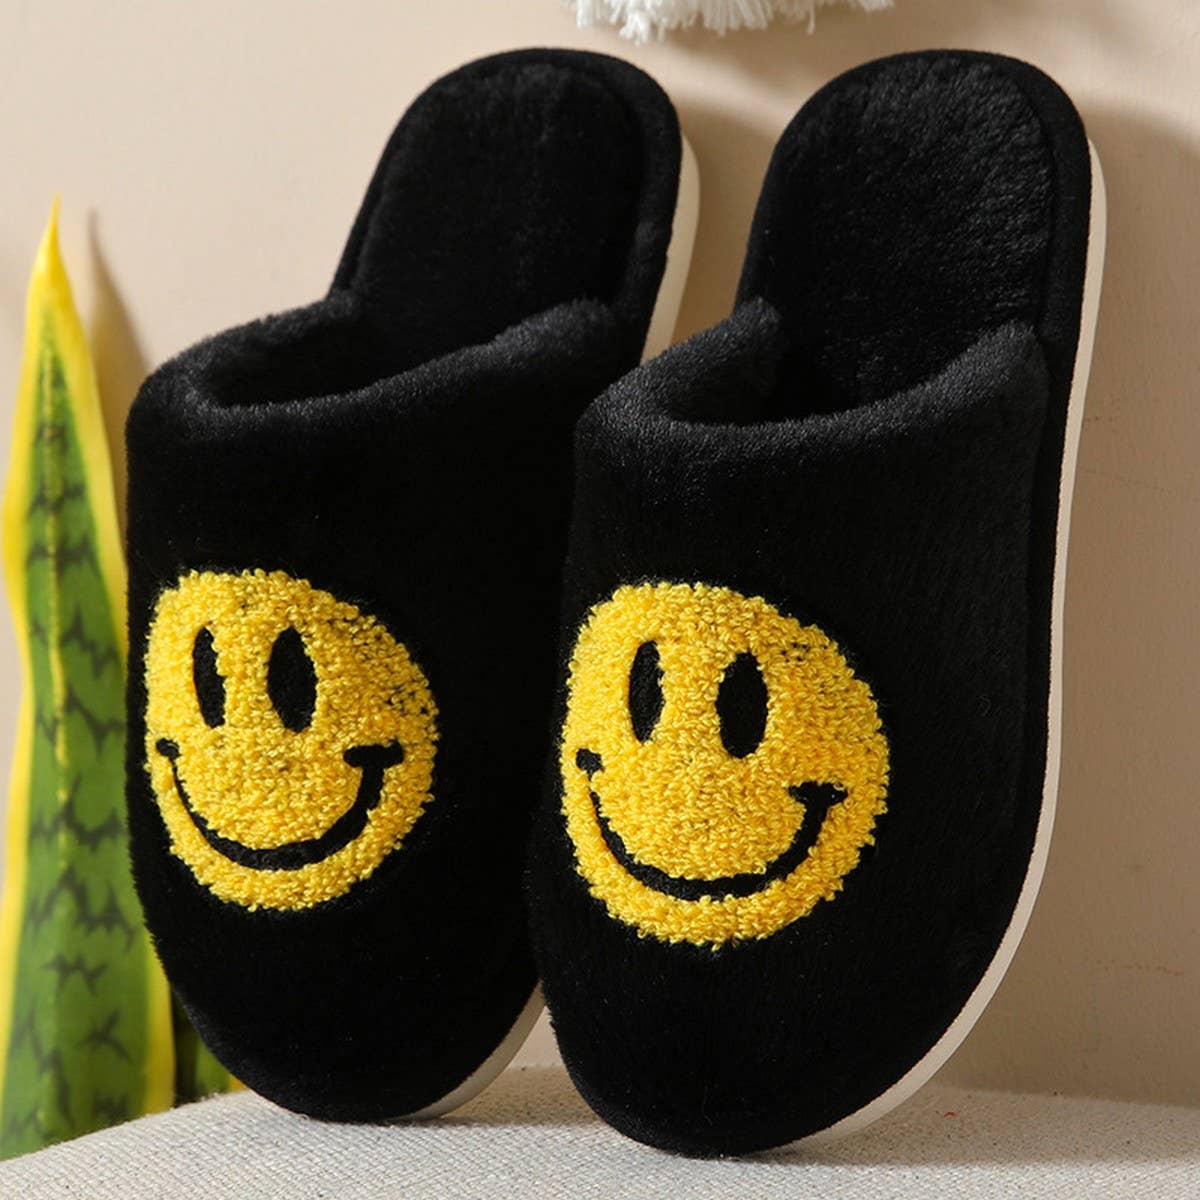 Pink Happy Face Slippers